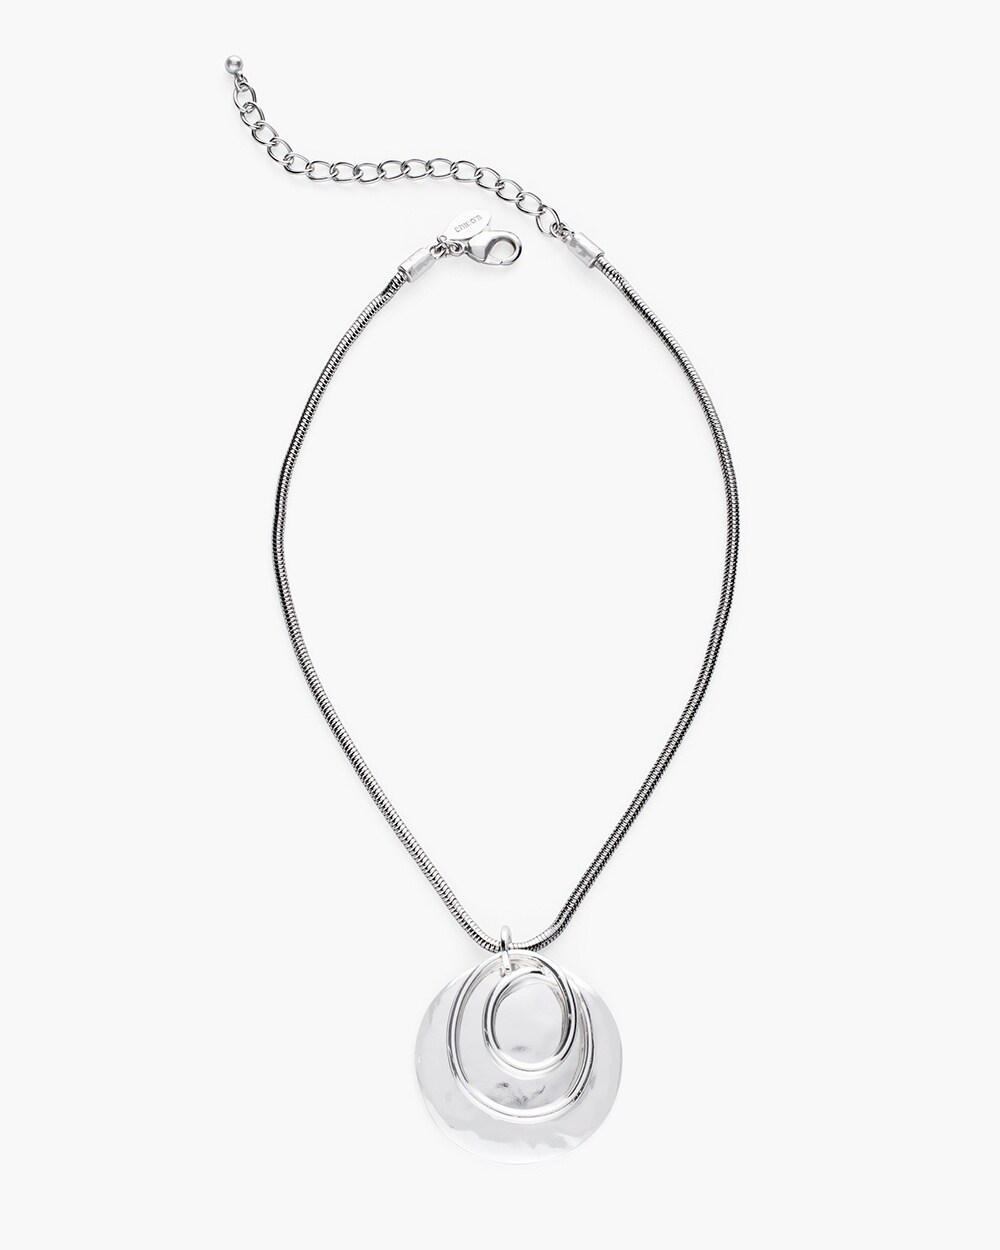 Silver-Tone Twisted Pendant Necklace